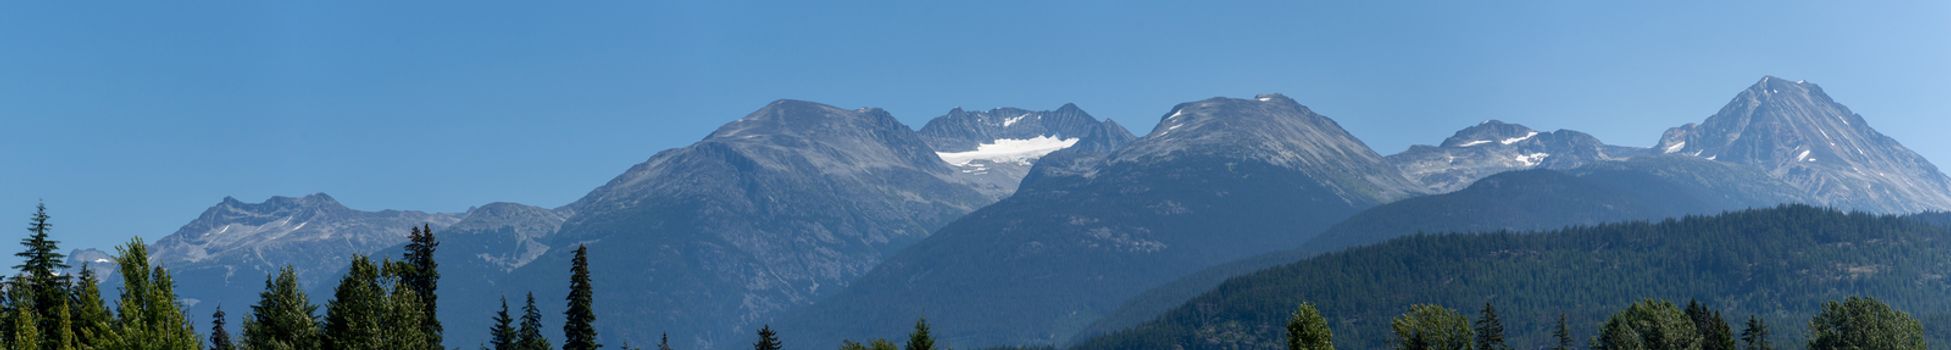 Whistler Mountain Panorama in British Columbia, Canada in the summer sun and blue sky looking at mountain range